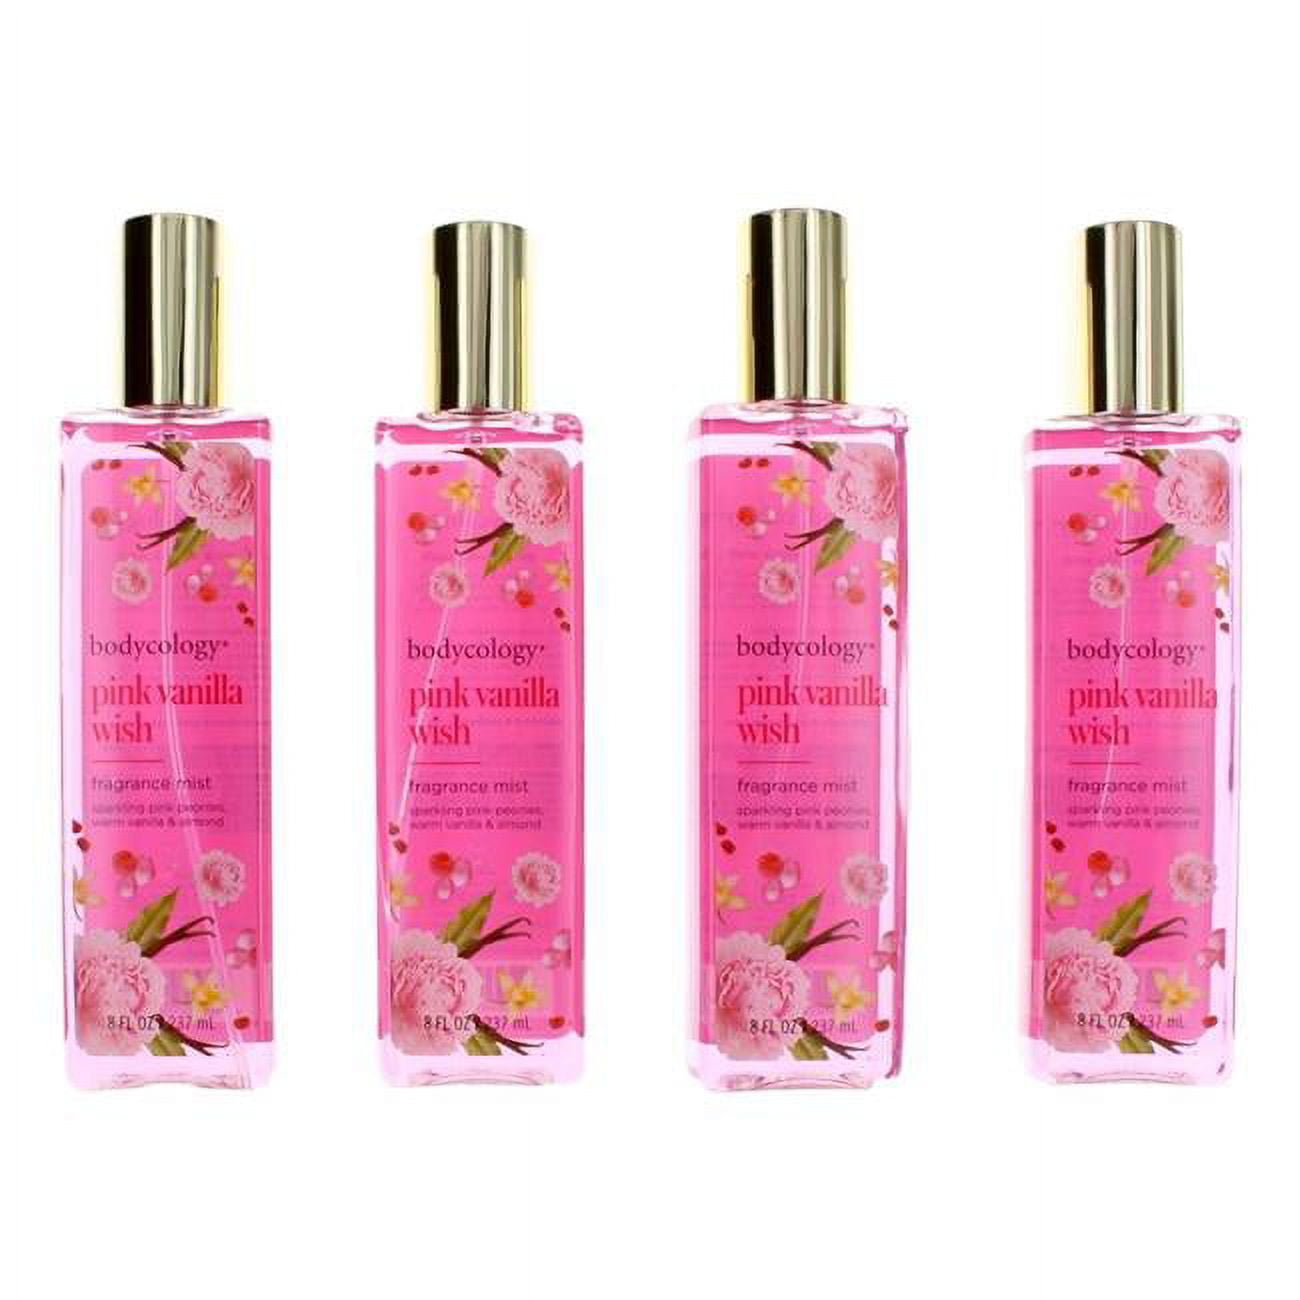 Pink Vanilla Wish by Bodycology, 4 Pack 8 oz Fragrance Mist for Women